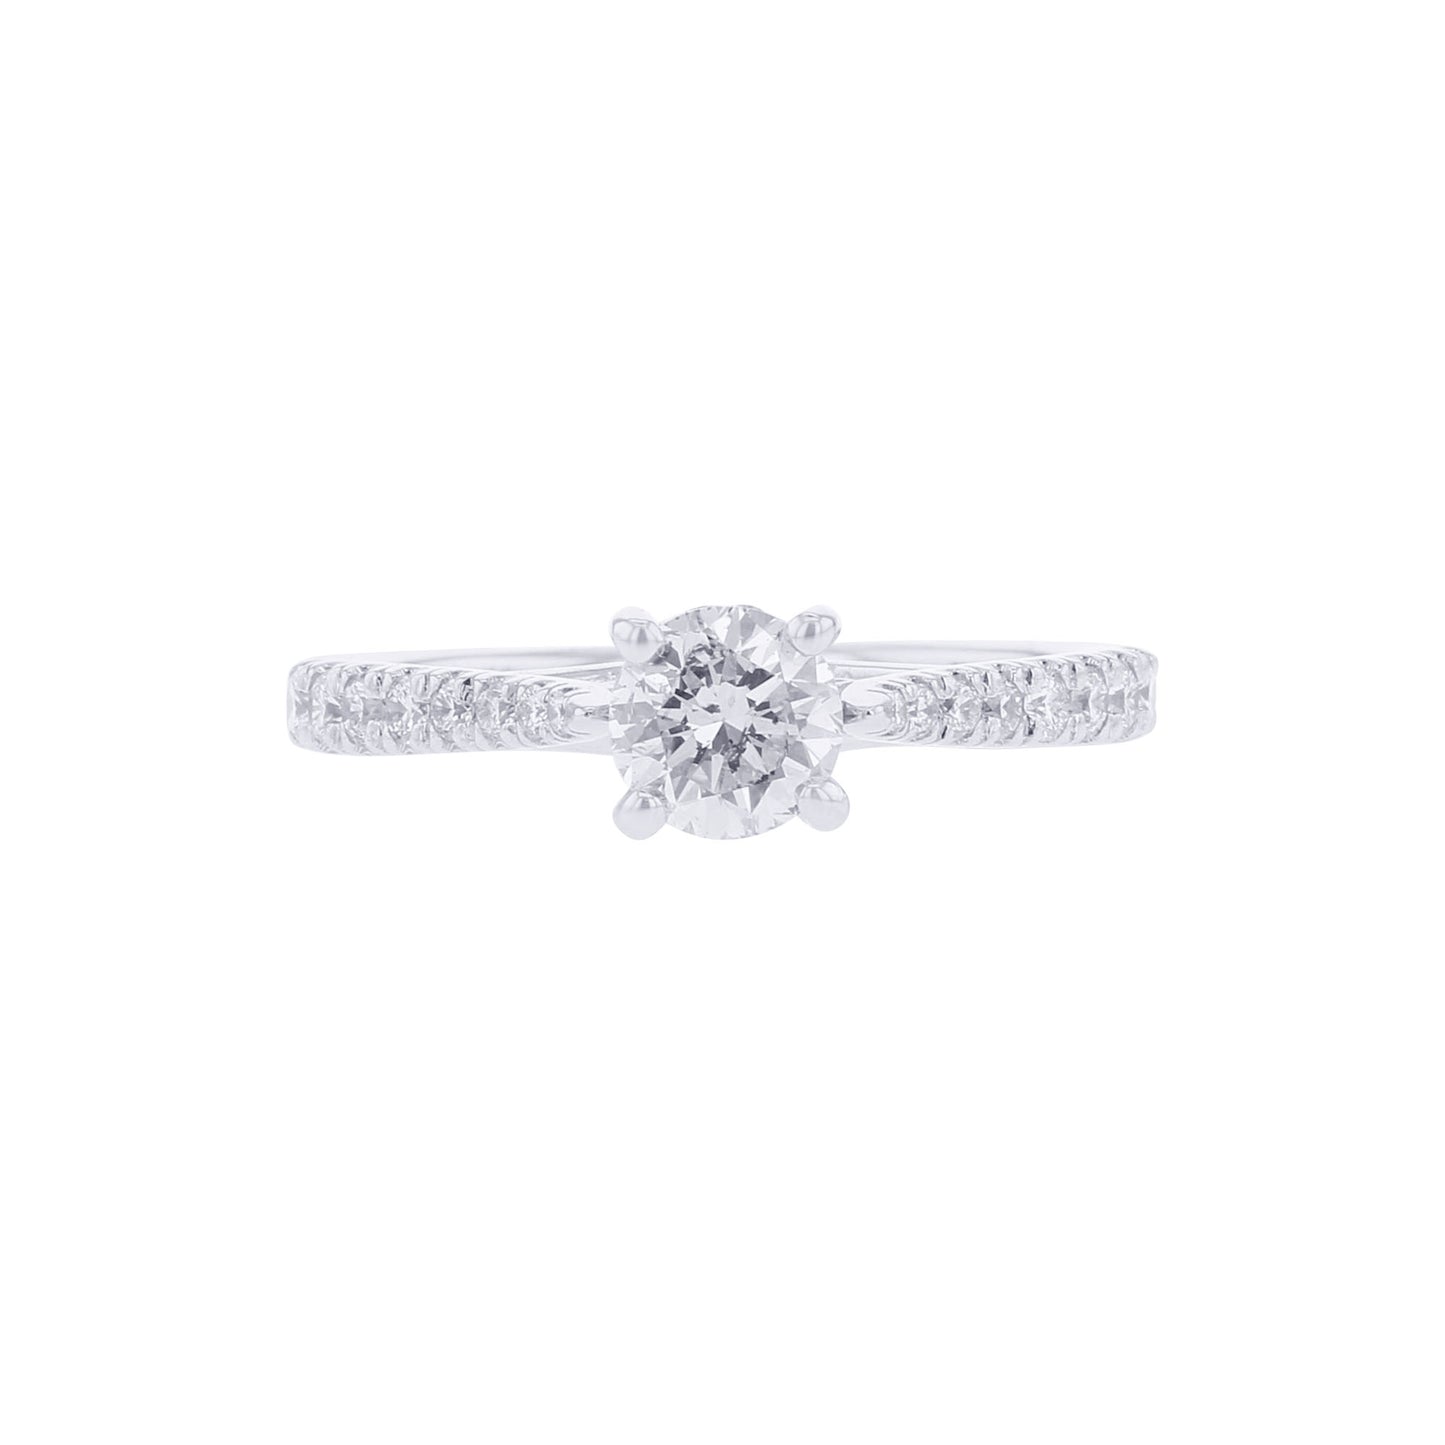 Anna Certified Ready for Love Diamond Engagement Ring